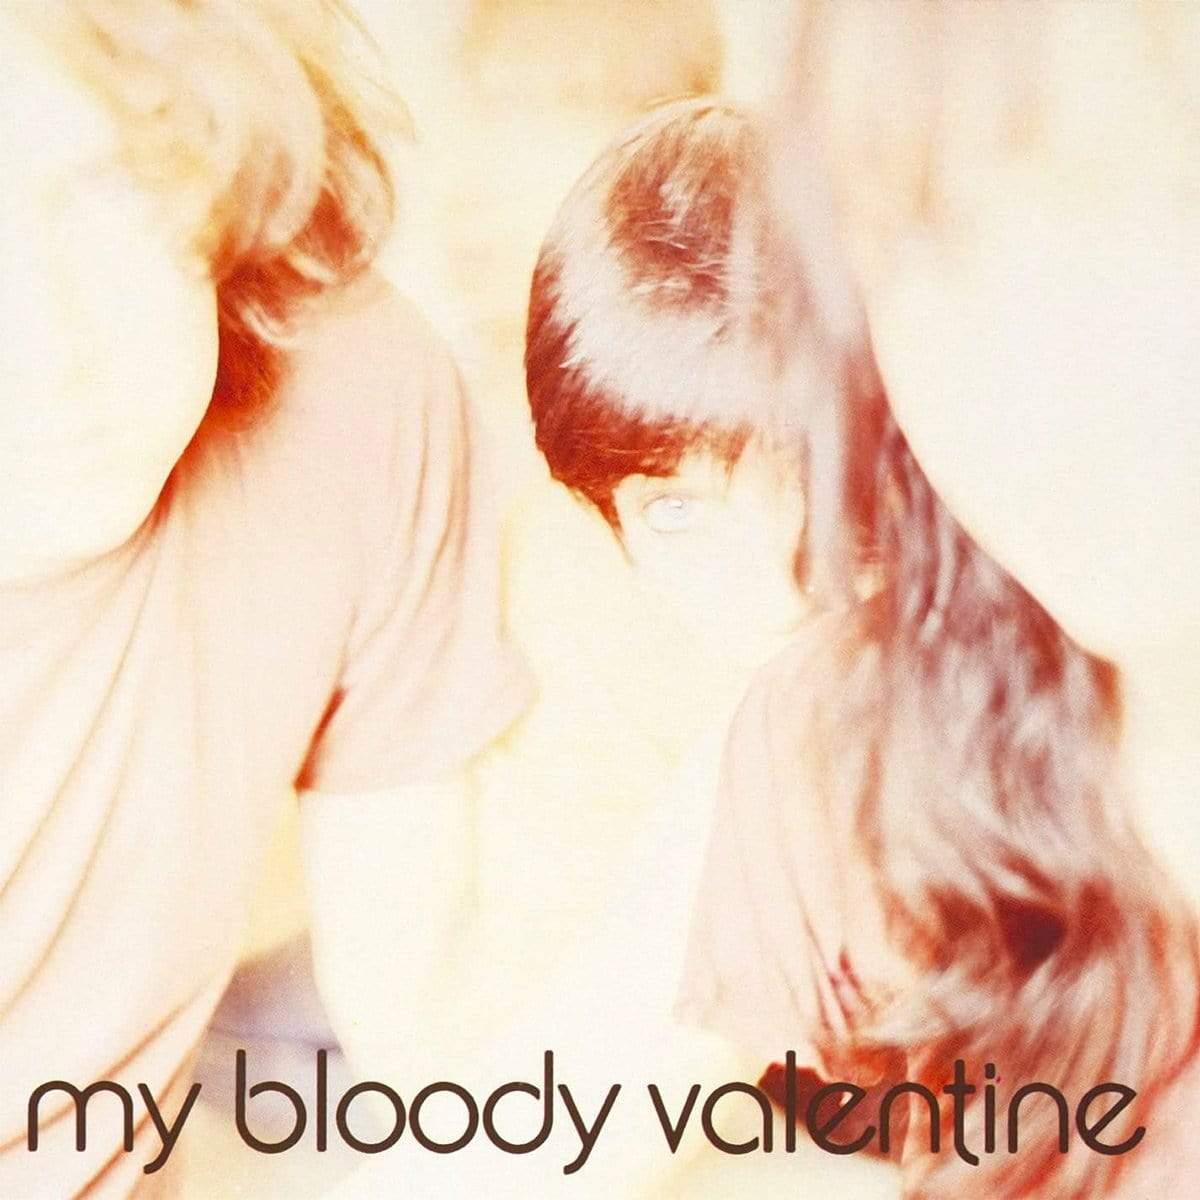 My Bloody Valentine - Isn't Anything (Limited Deluxe Edition, Gatefold, 180 Gram) (LP) - Joco Records